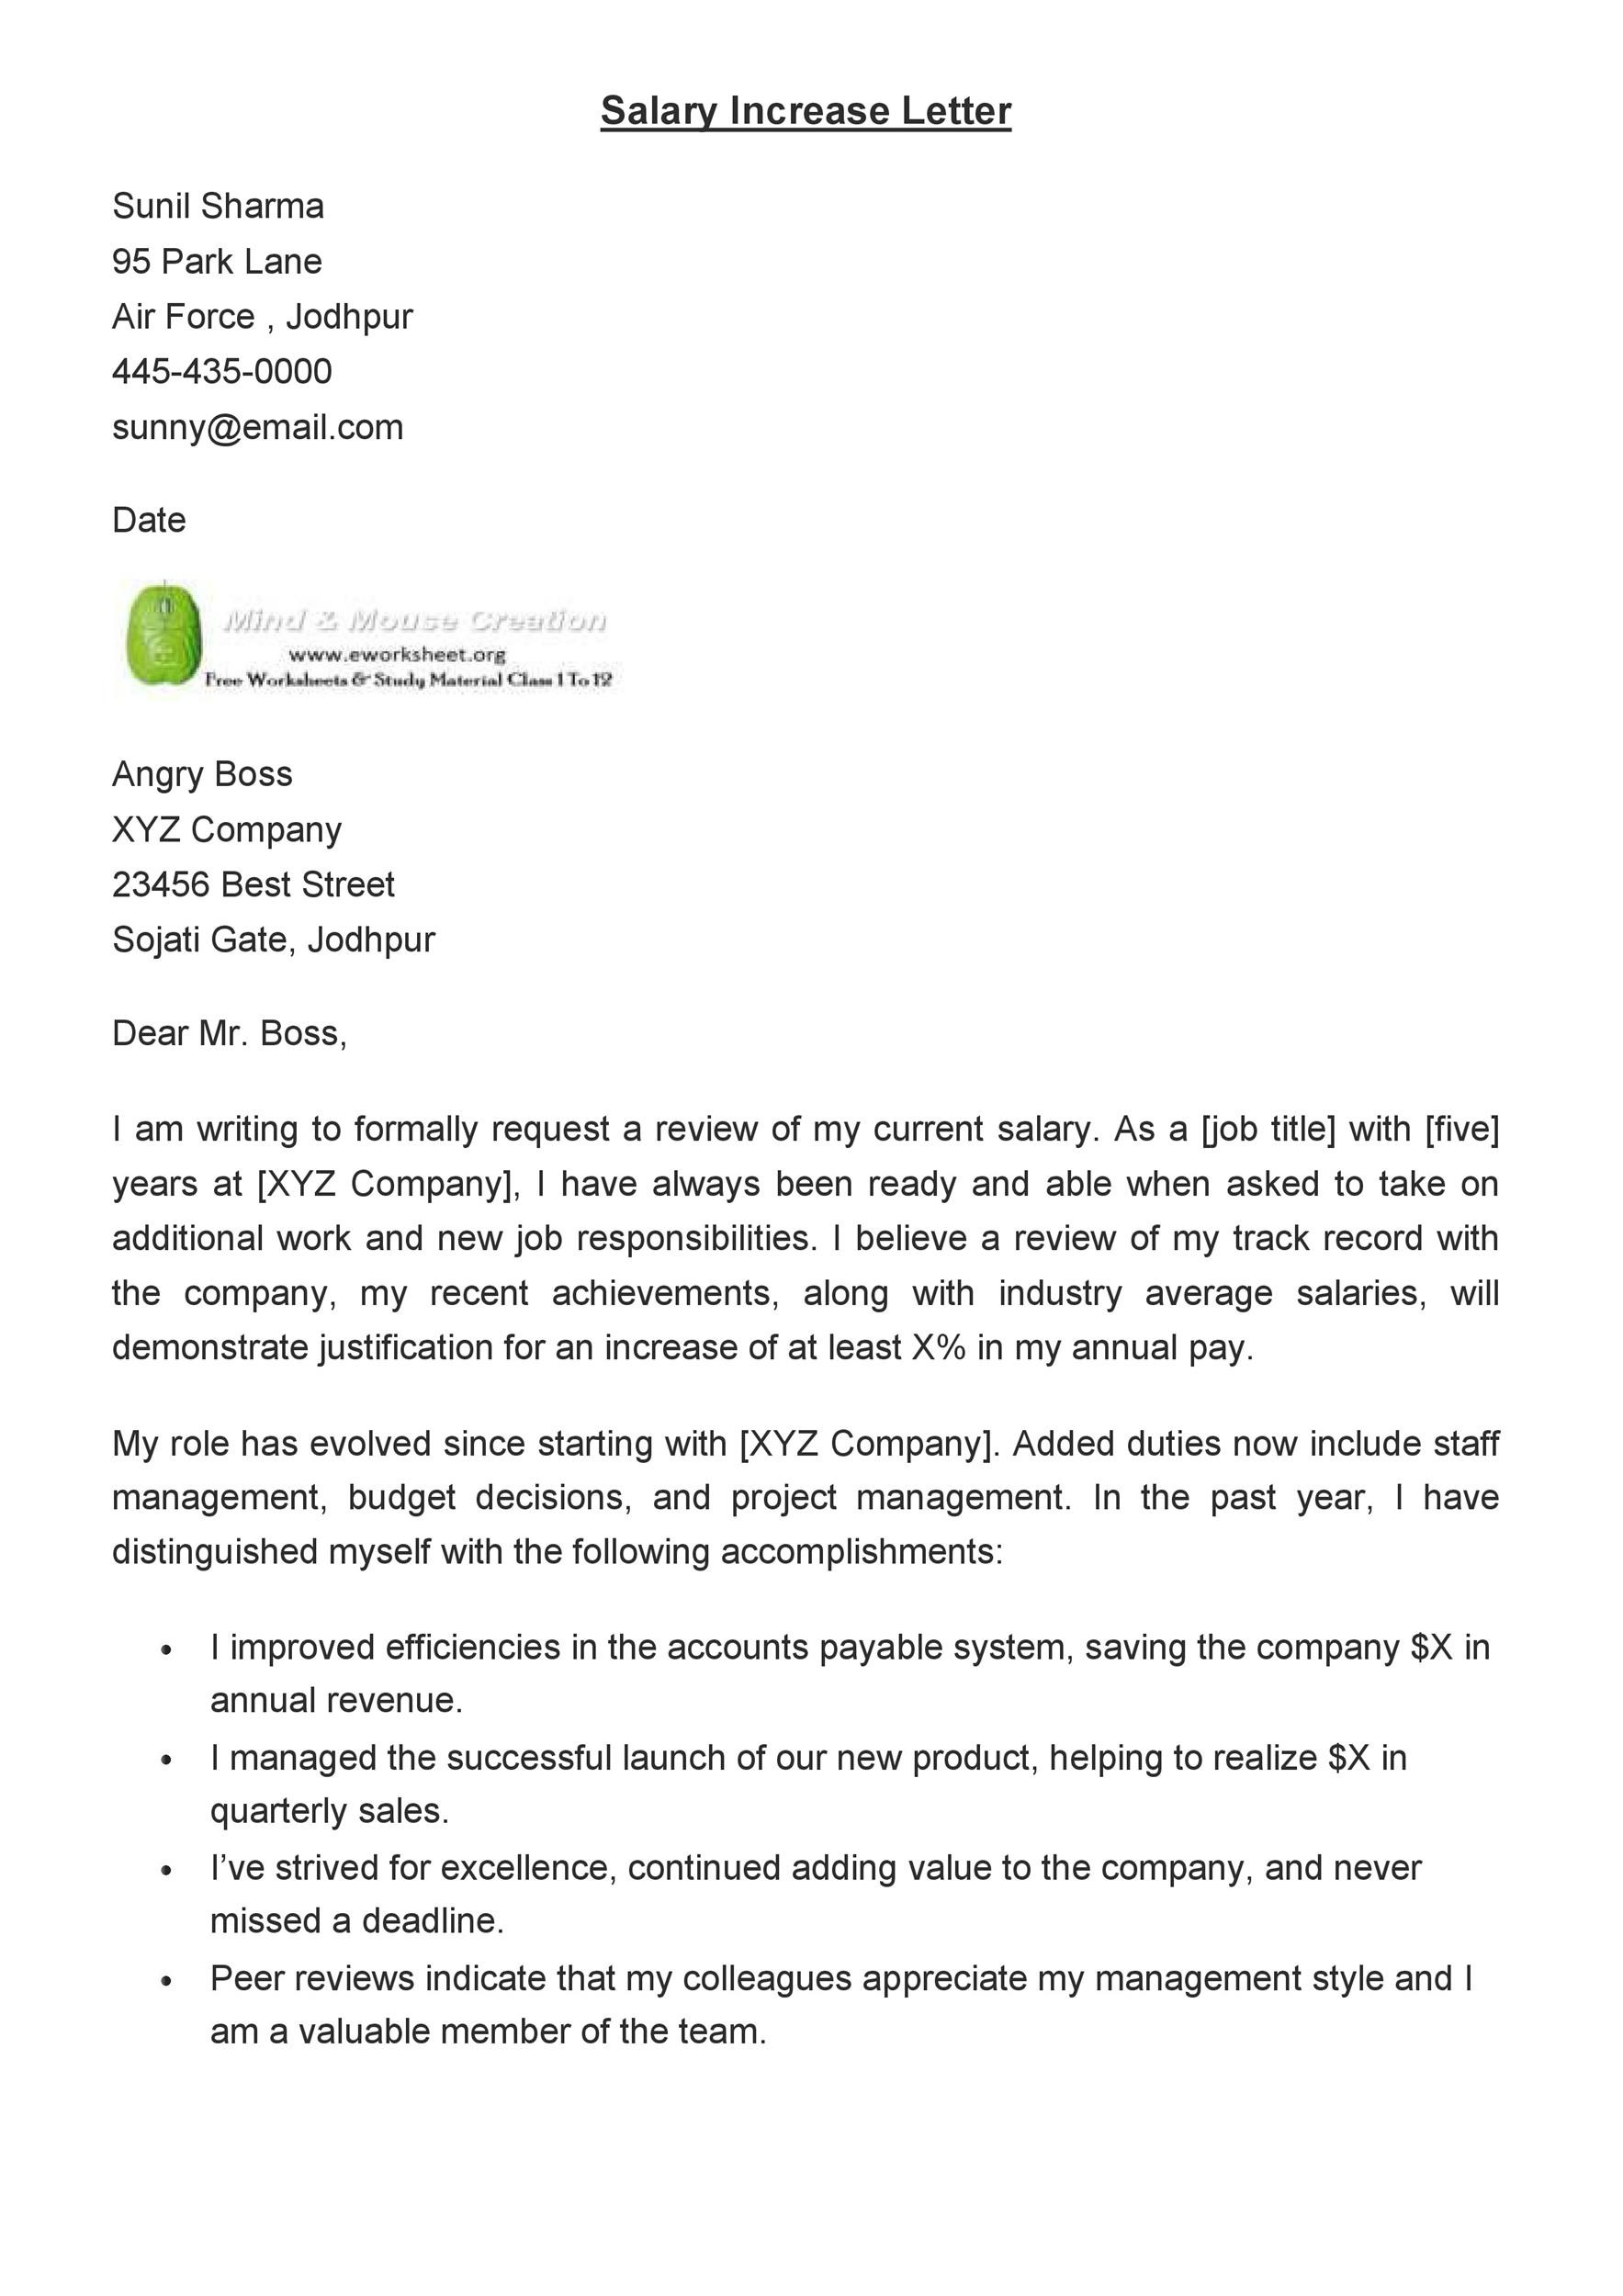 Sample Letter Asking For Pay Raise Collection | Letter ...